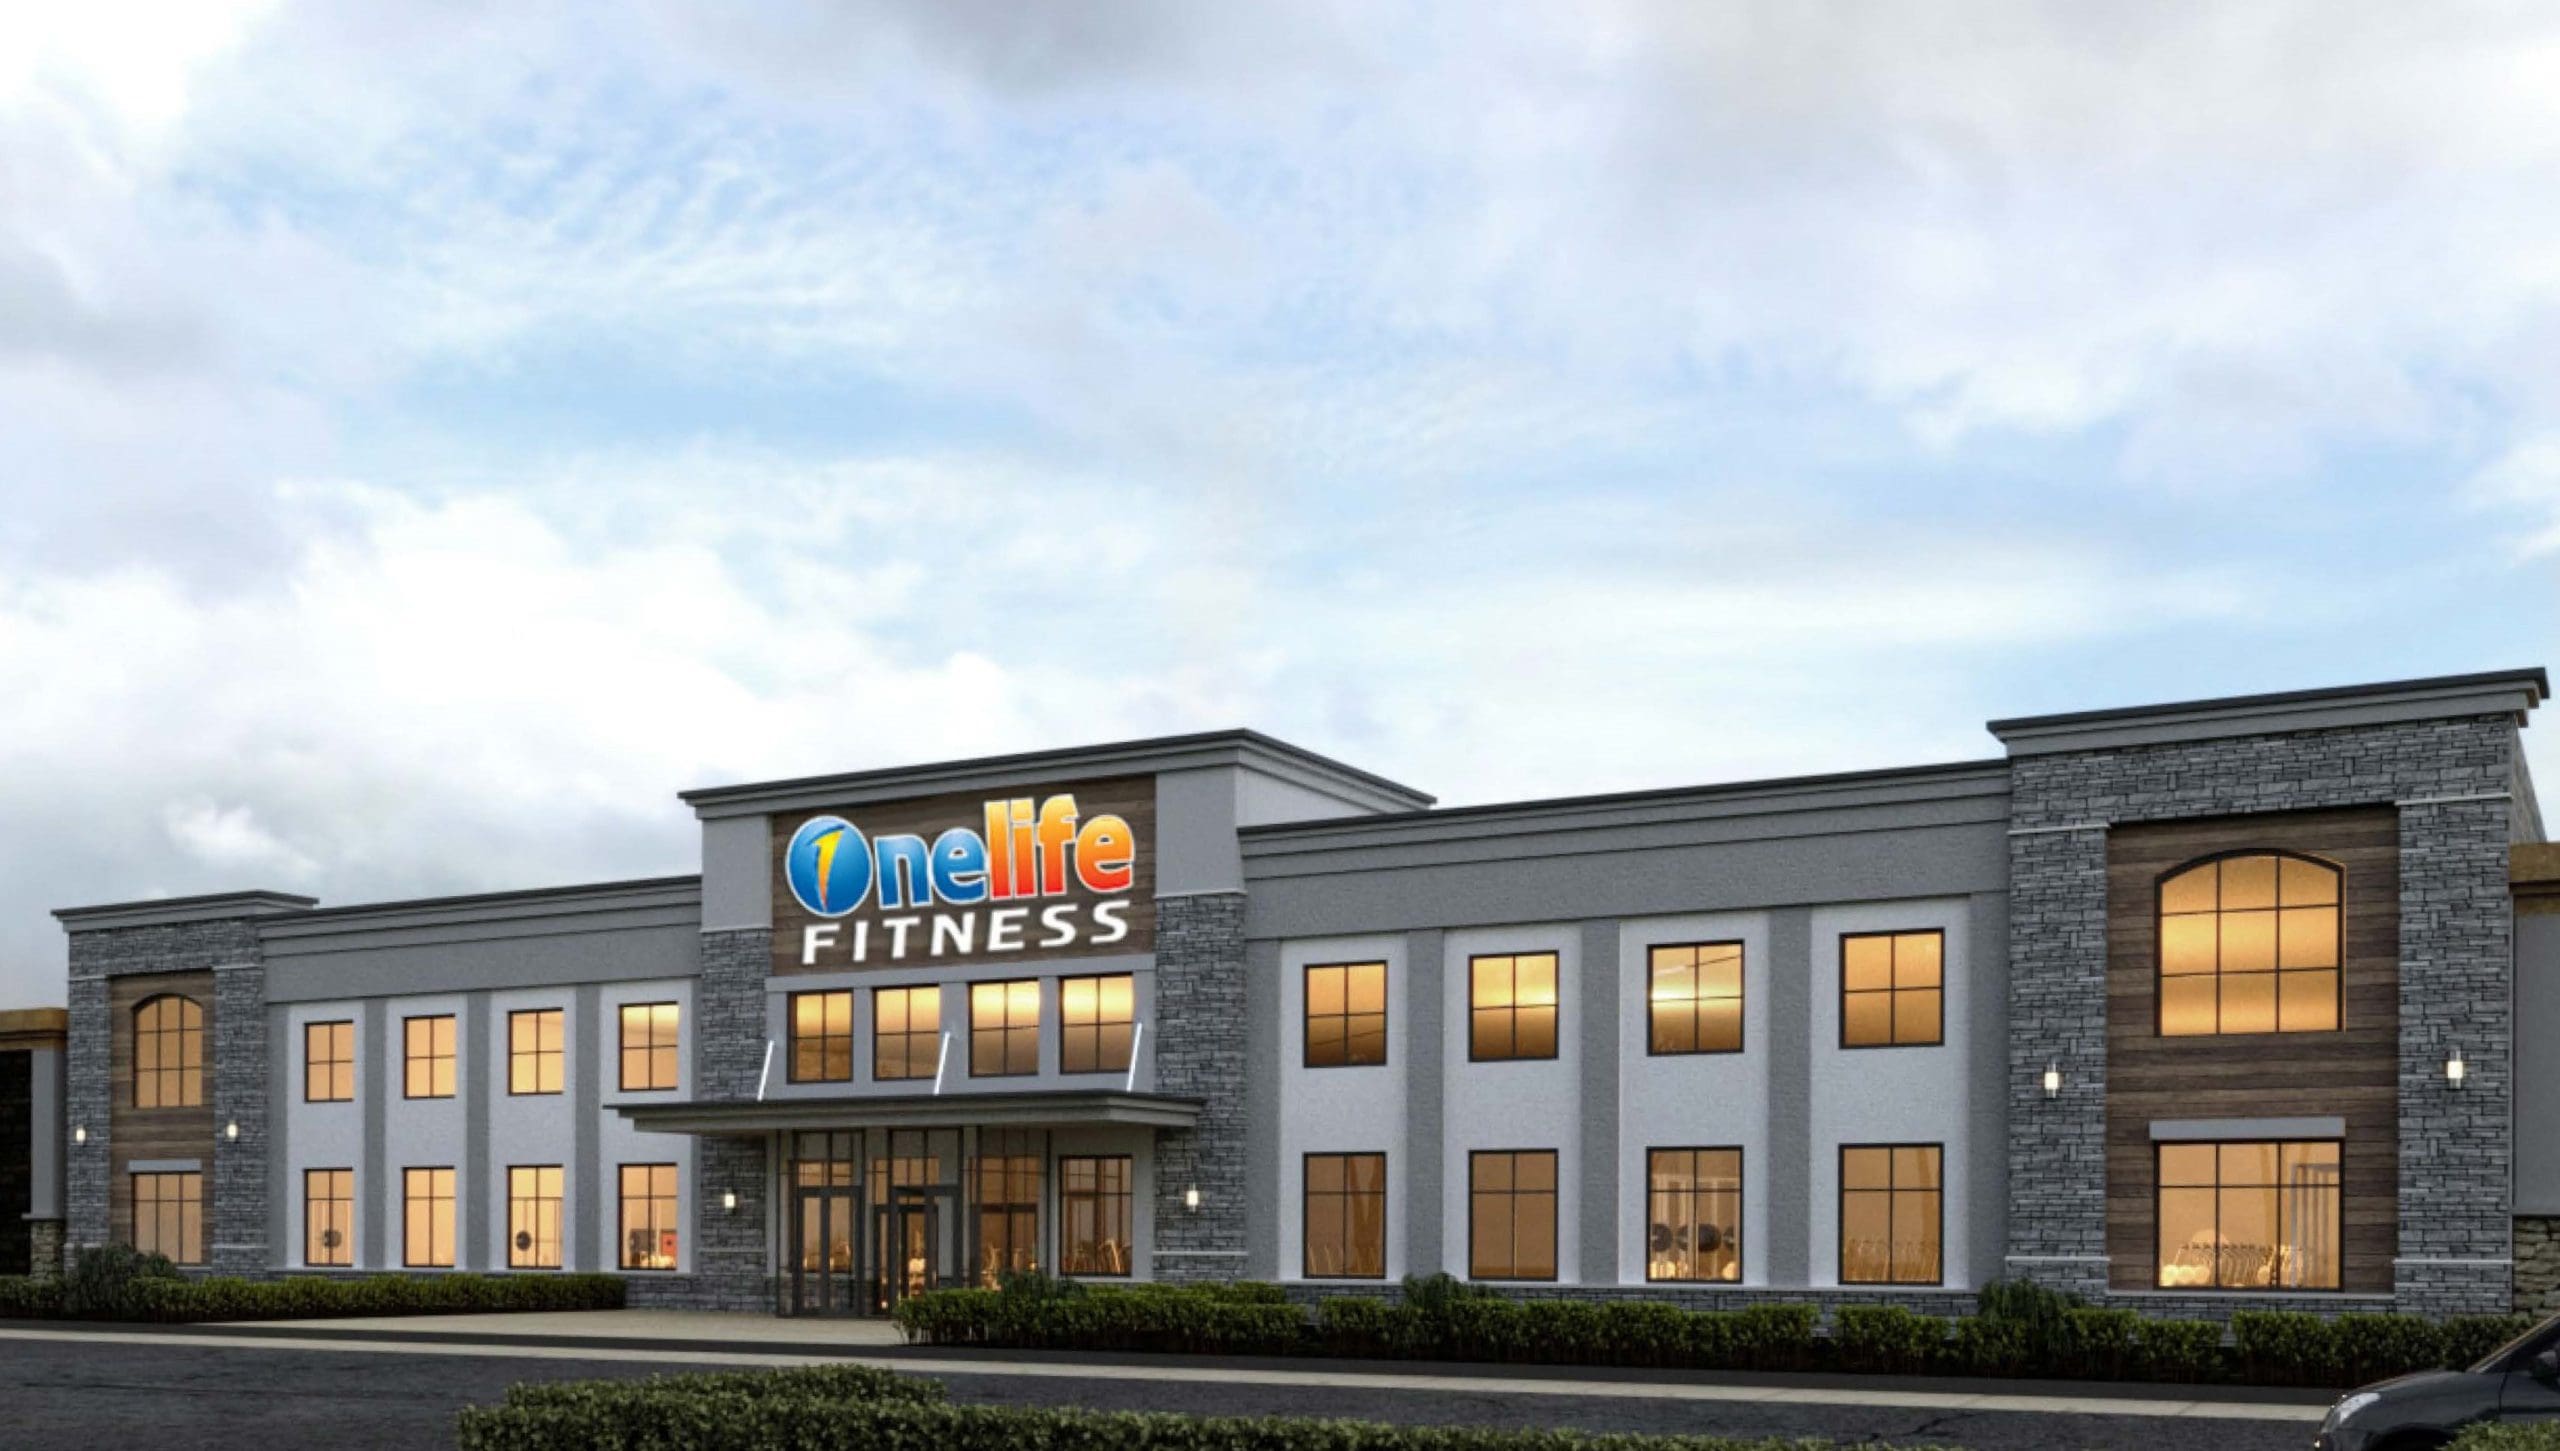 Onelife Fitness Gyms in VA, MD, DC & GA